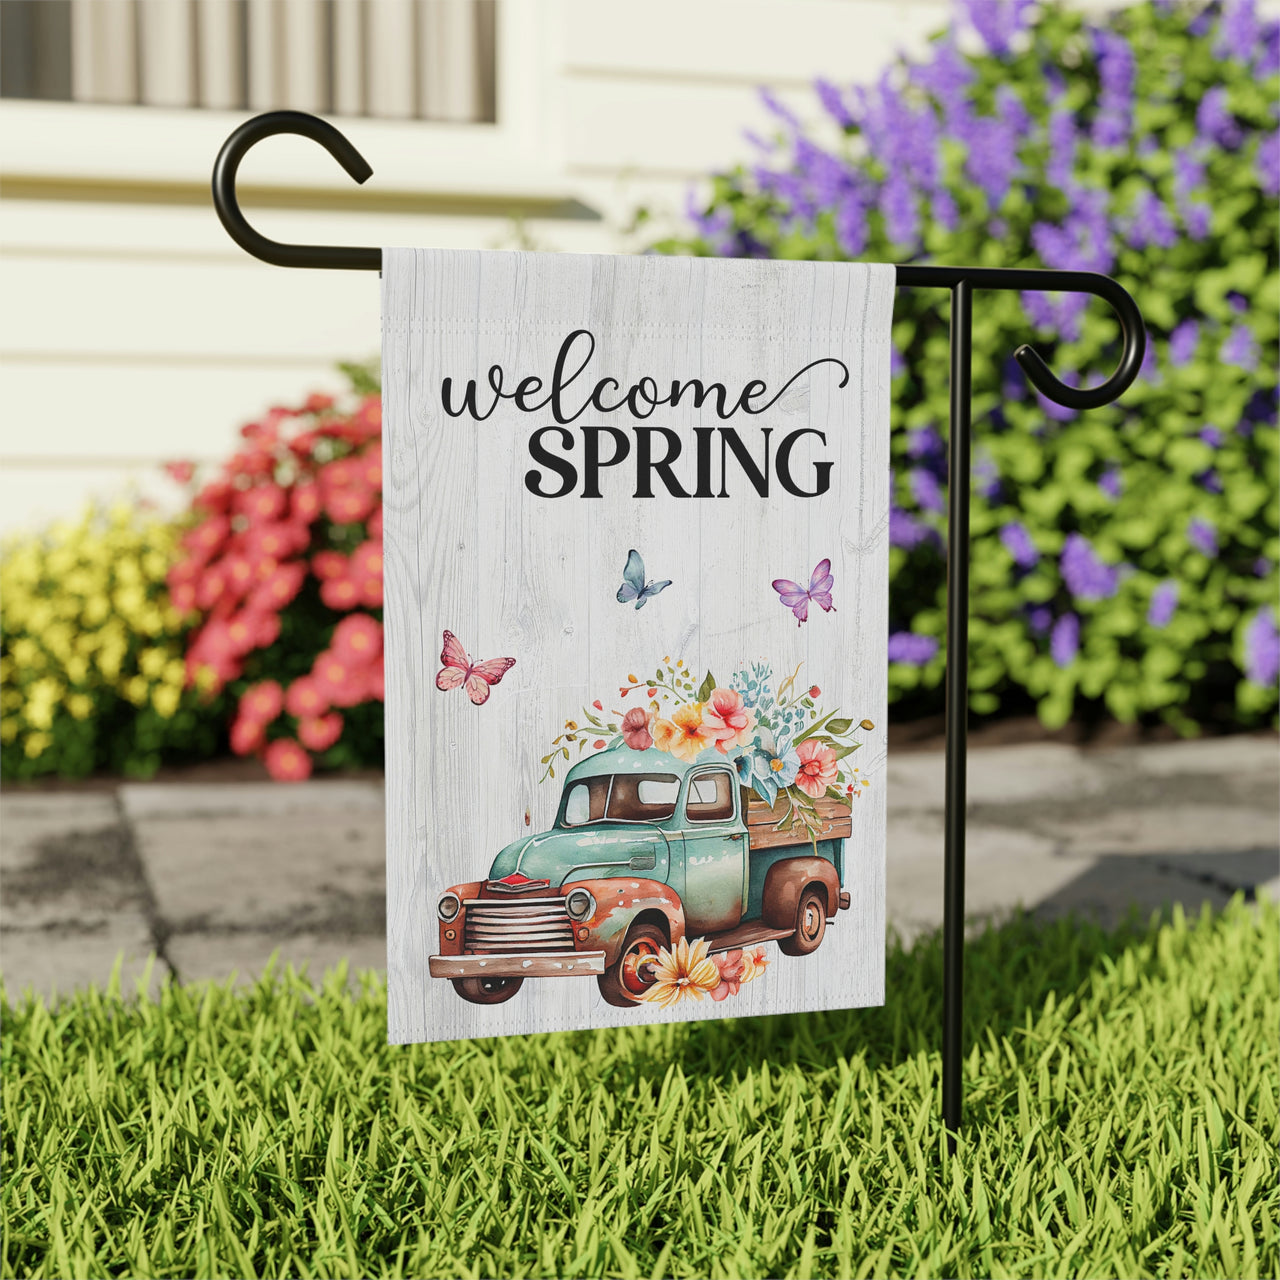 Welcome Spring Garden Flag - Vintage Truck with Flowers